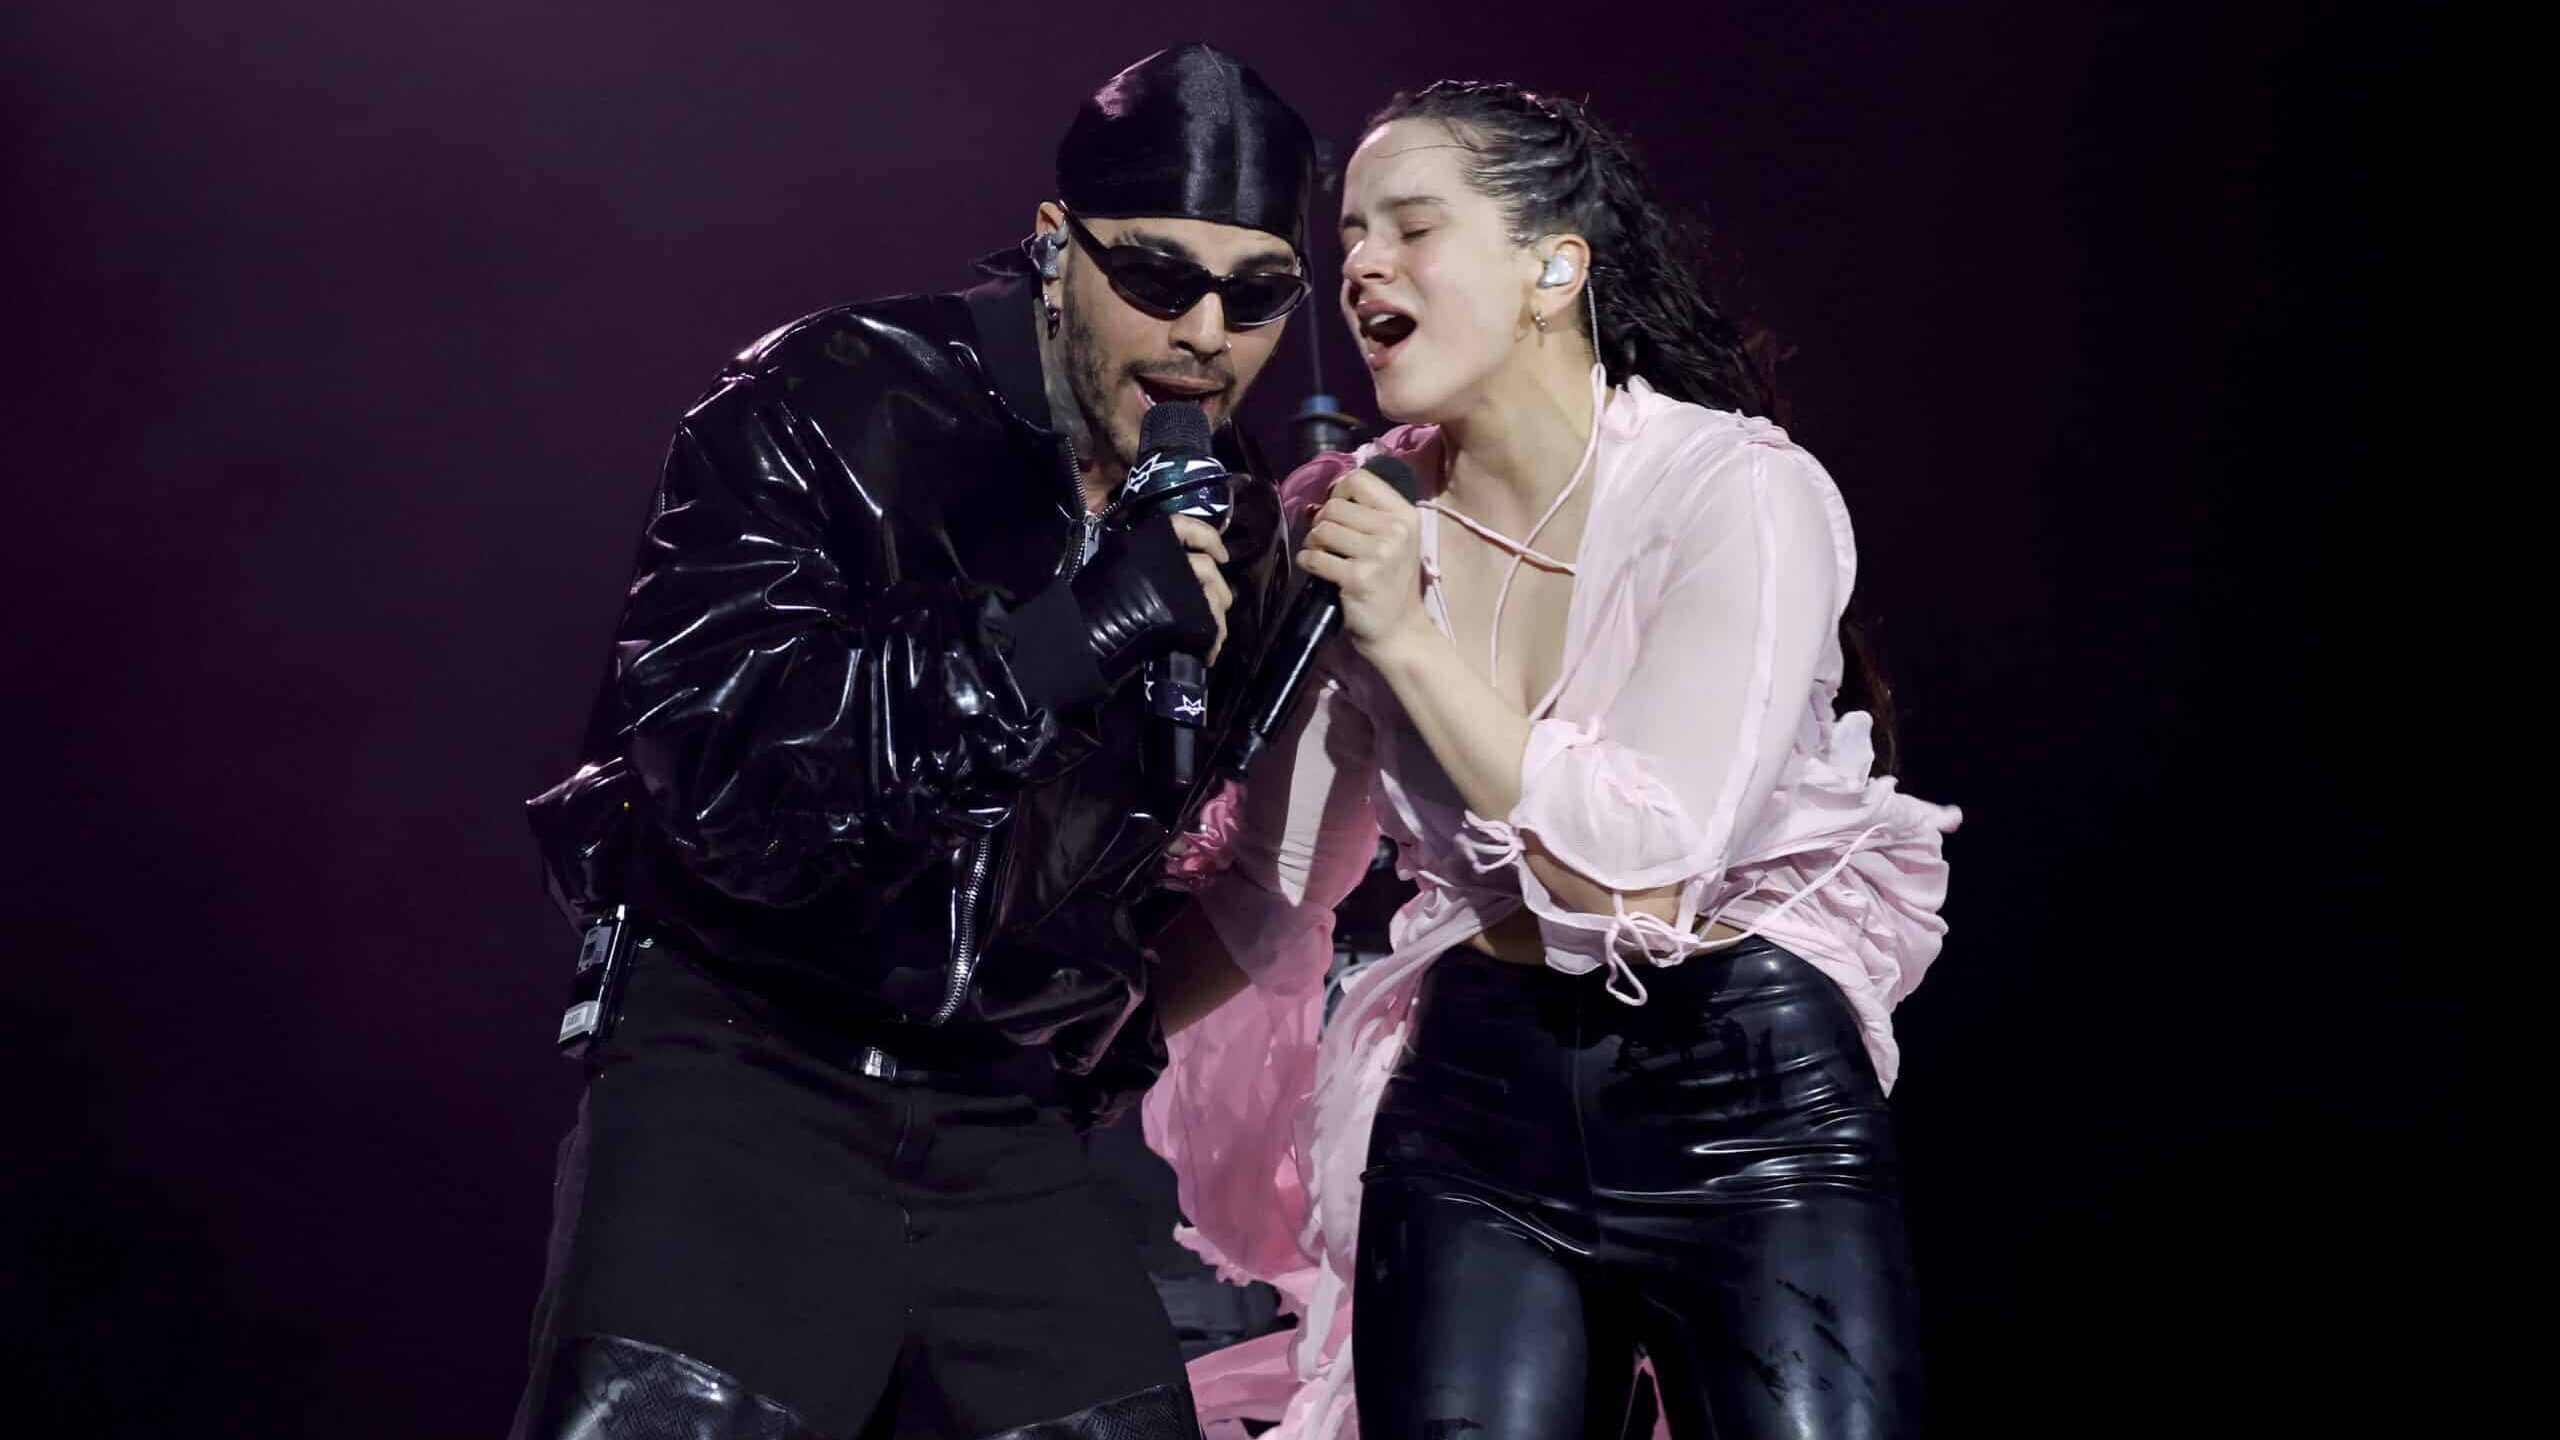 INDIO, CALIFORNIA - APRIL 15: (L-R) Rauw Alejandro performs with Rosalía at the Coachella Stage during the 2023 Coachella Valley Music and Arts Festival on April 15, 2023 in Indio, California.